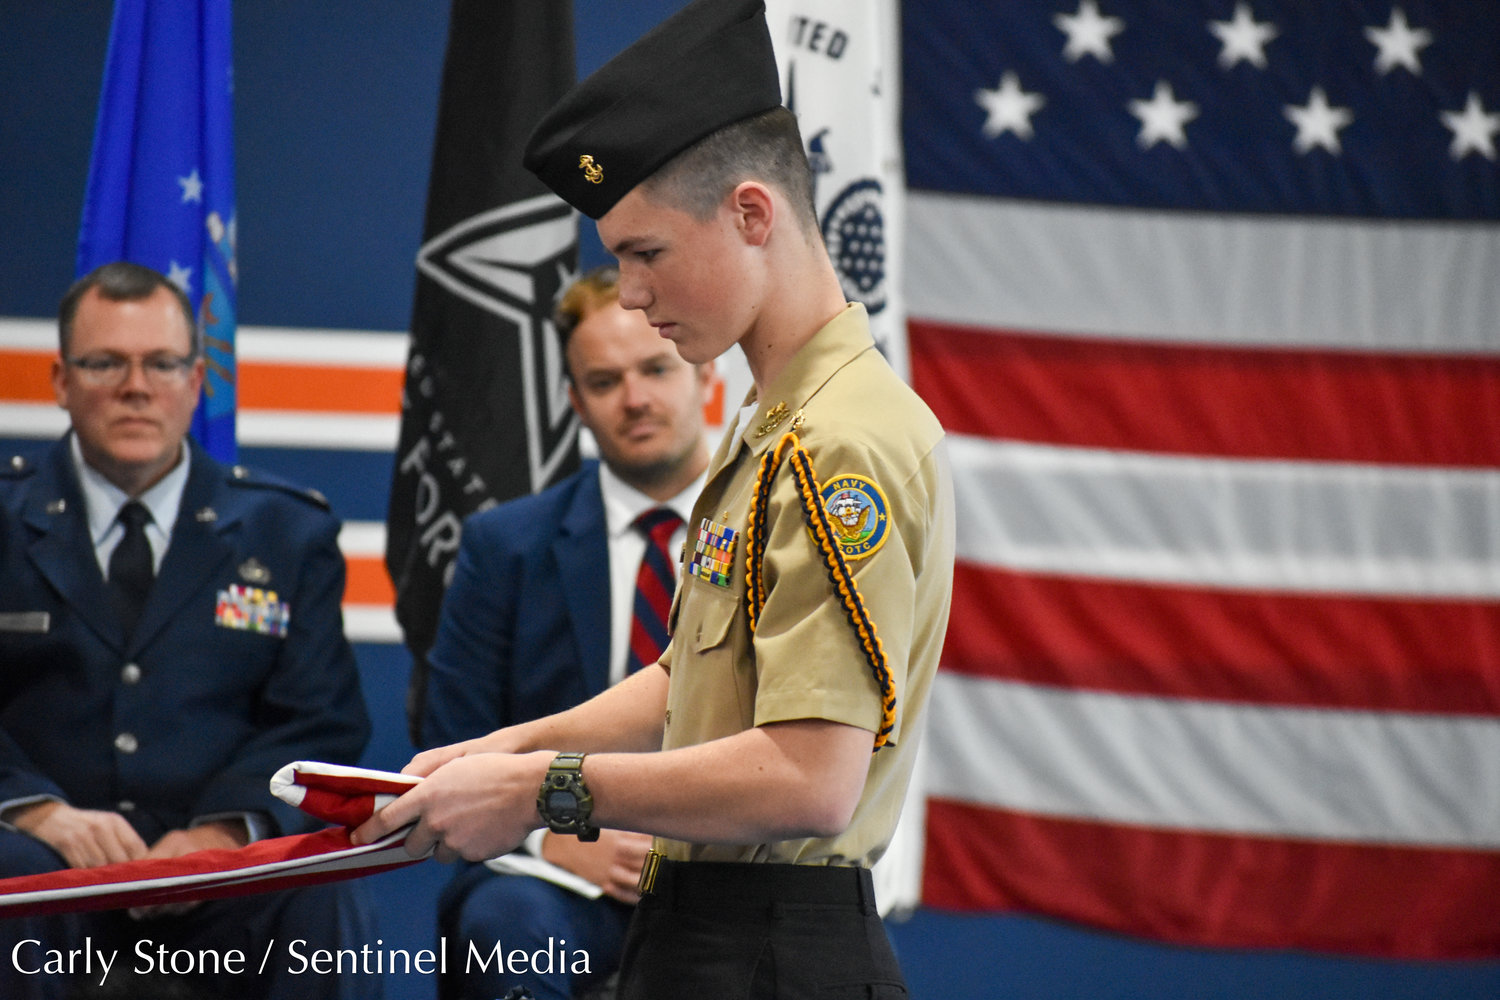 Members of the Notre Dame NJROTC (Navy Junior Reserve Officer Training Corps) participated in a flag folding ceremony during the 8th Annual Flags for Heroes Recognition Ceremony on November 5, 2022 at the Parkway Center.